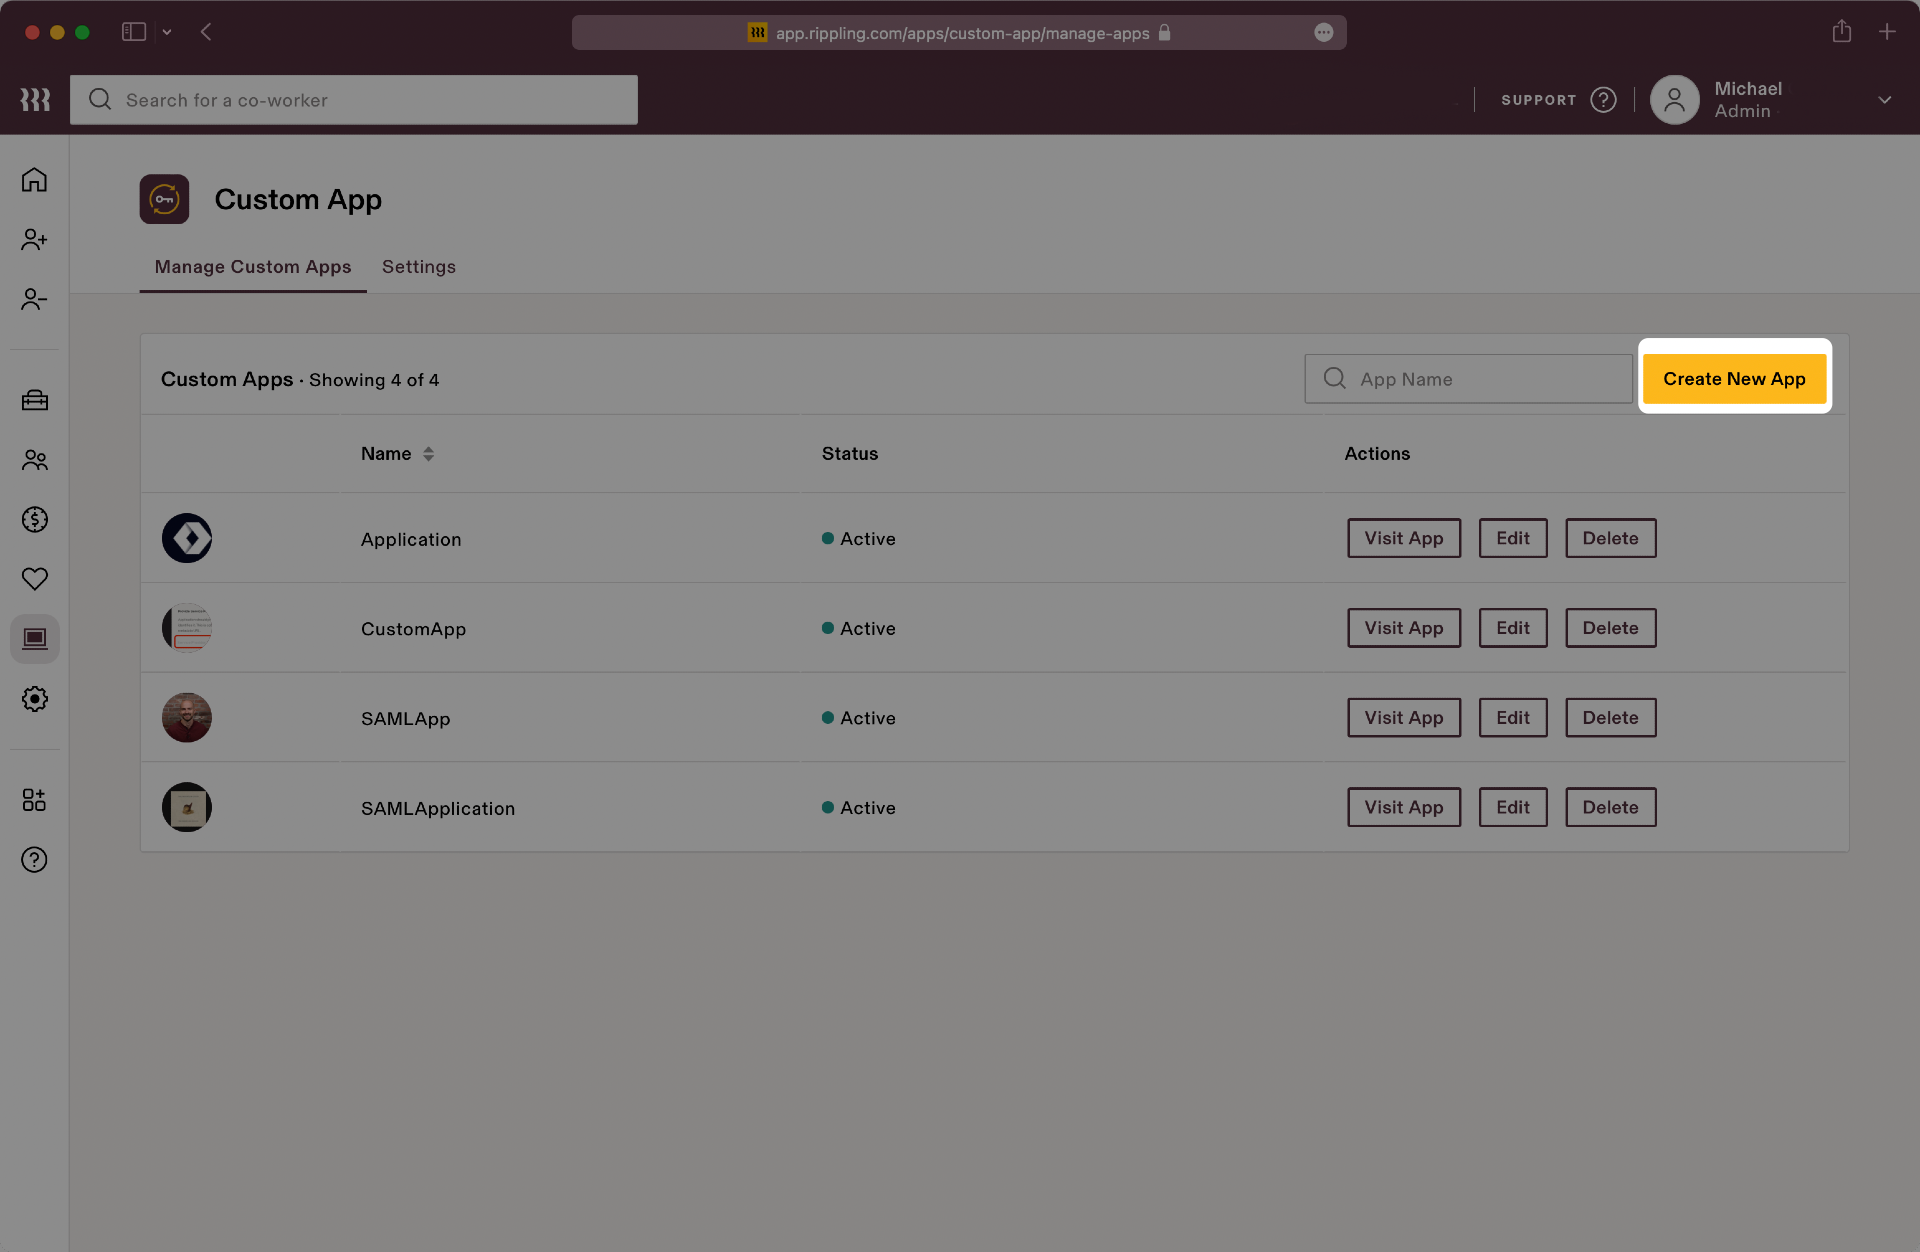 A screenshot showing where to select "Create New App" in the Rippling dashboard.